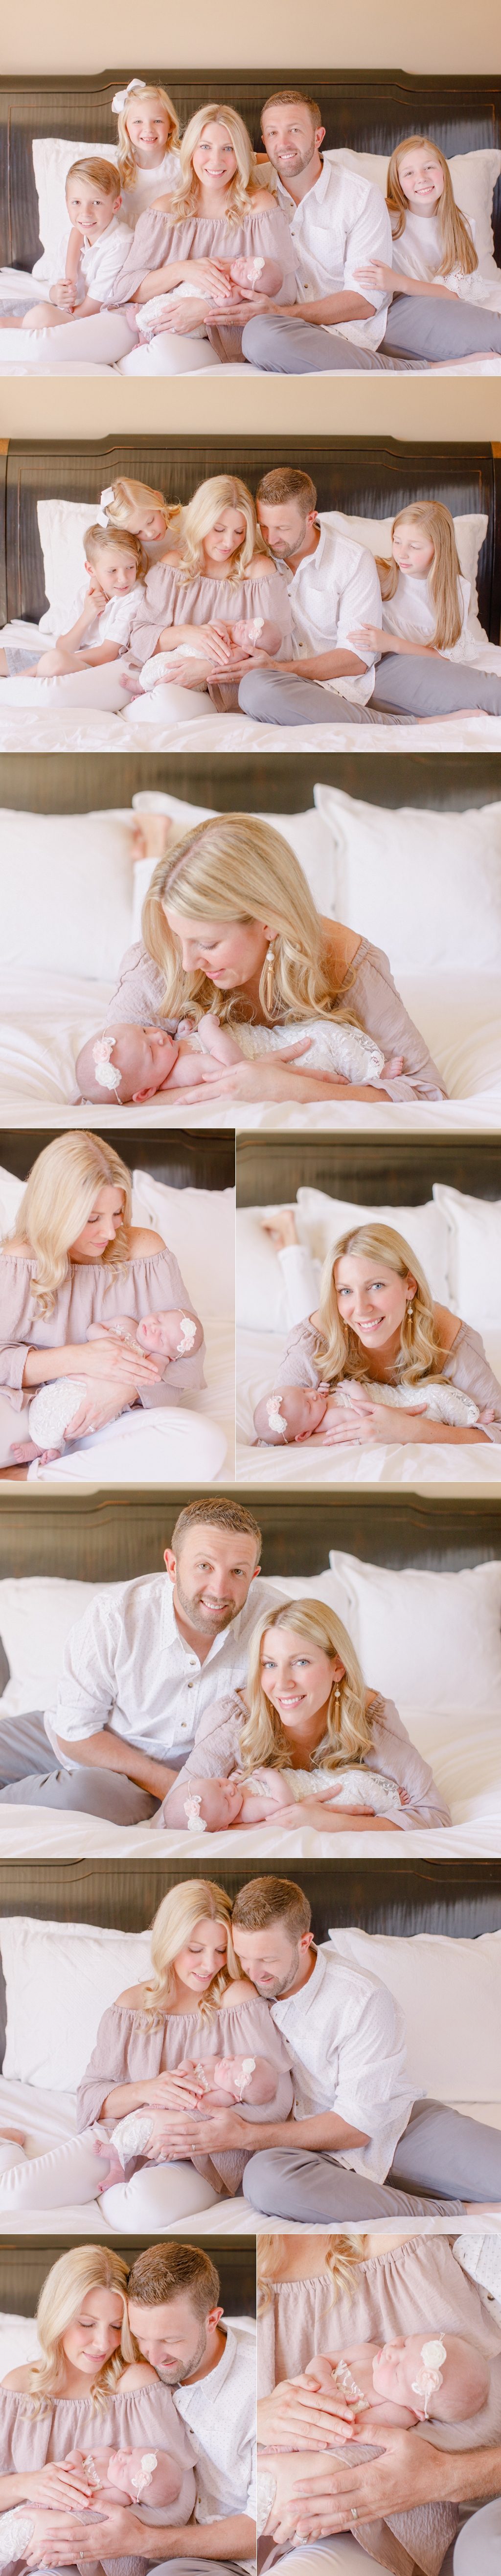 Examples of what to wear for newborn photoshoot.